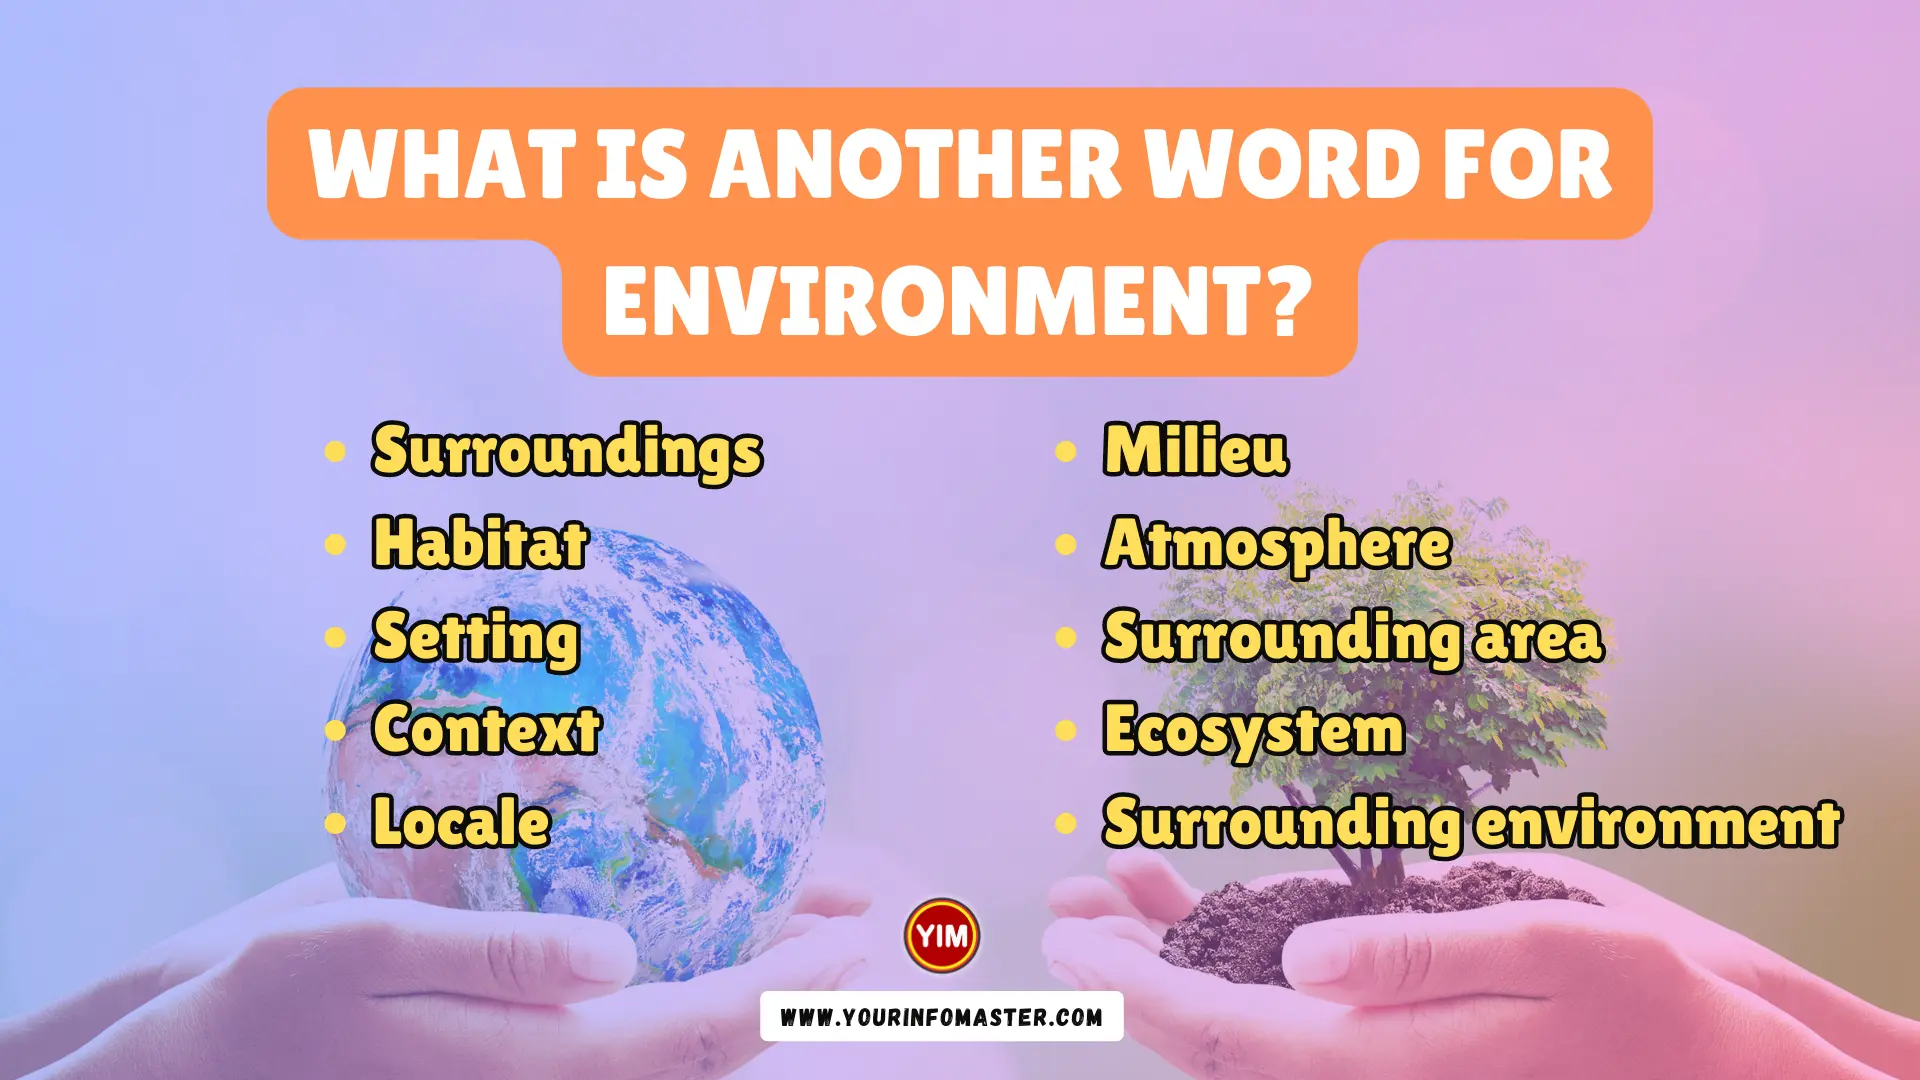 What is another word for Environment